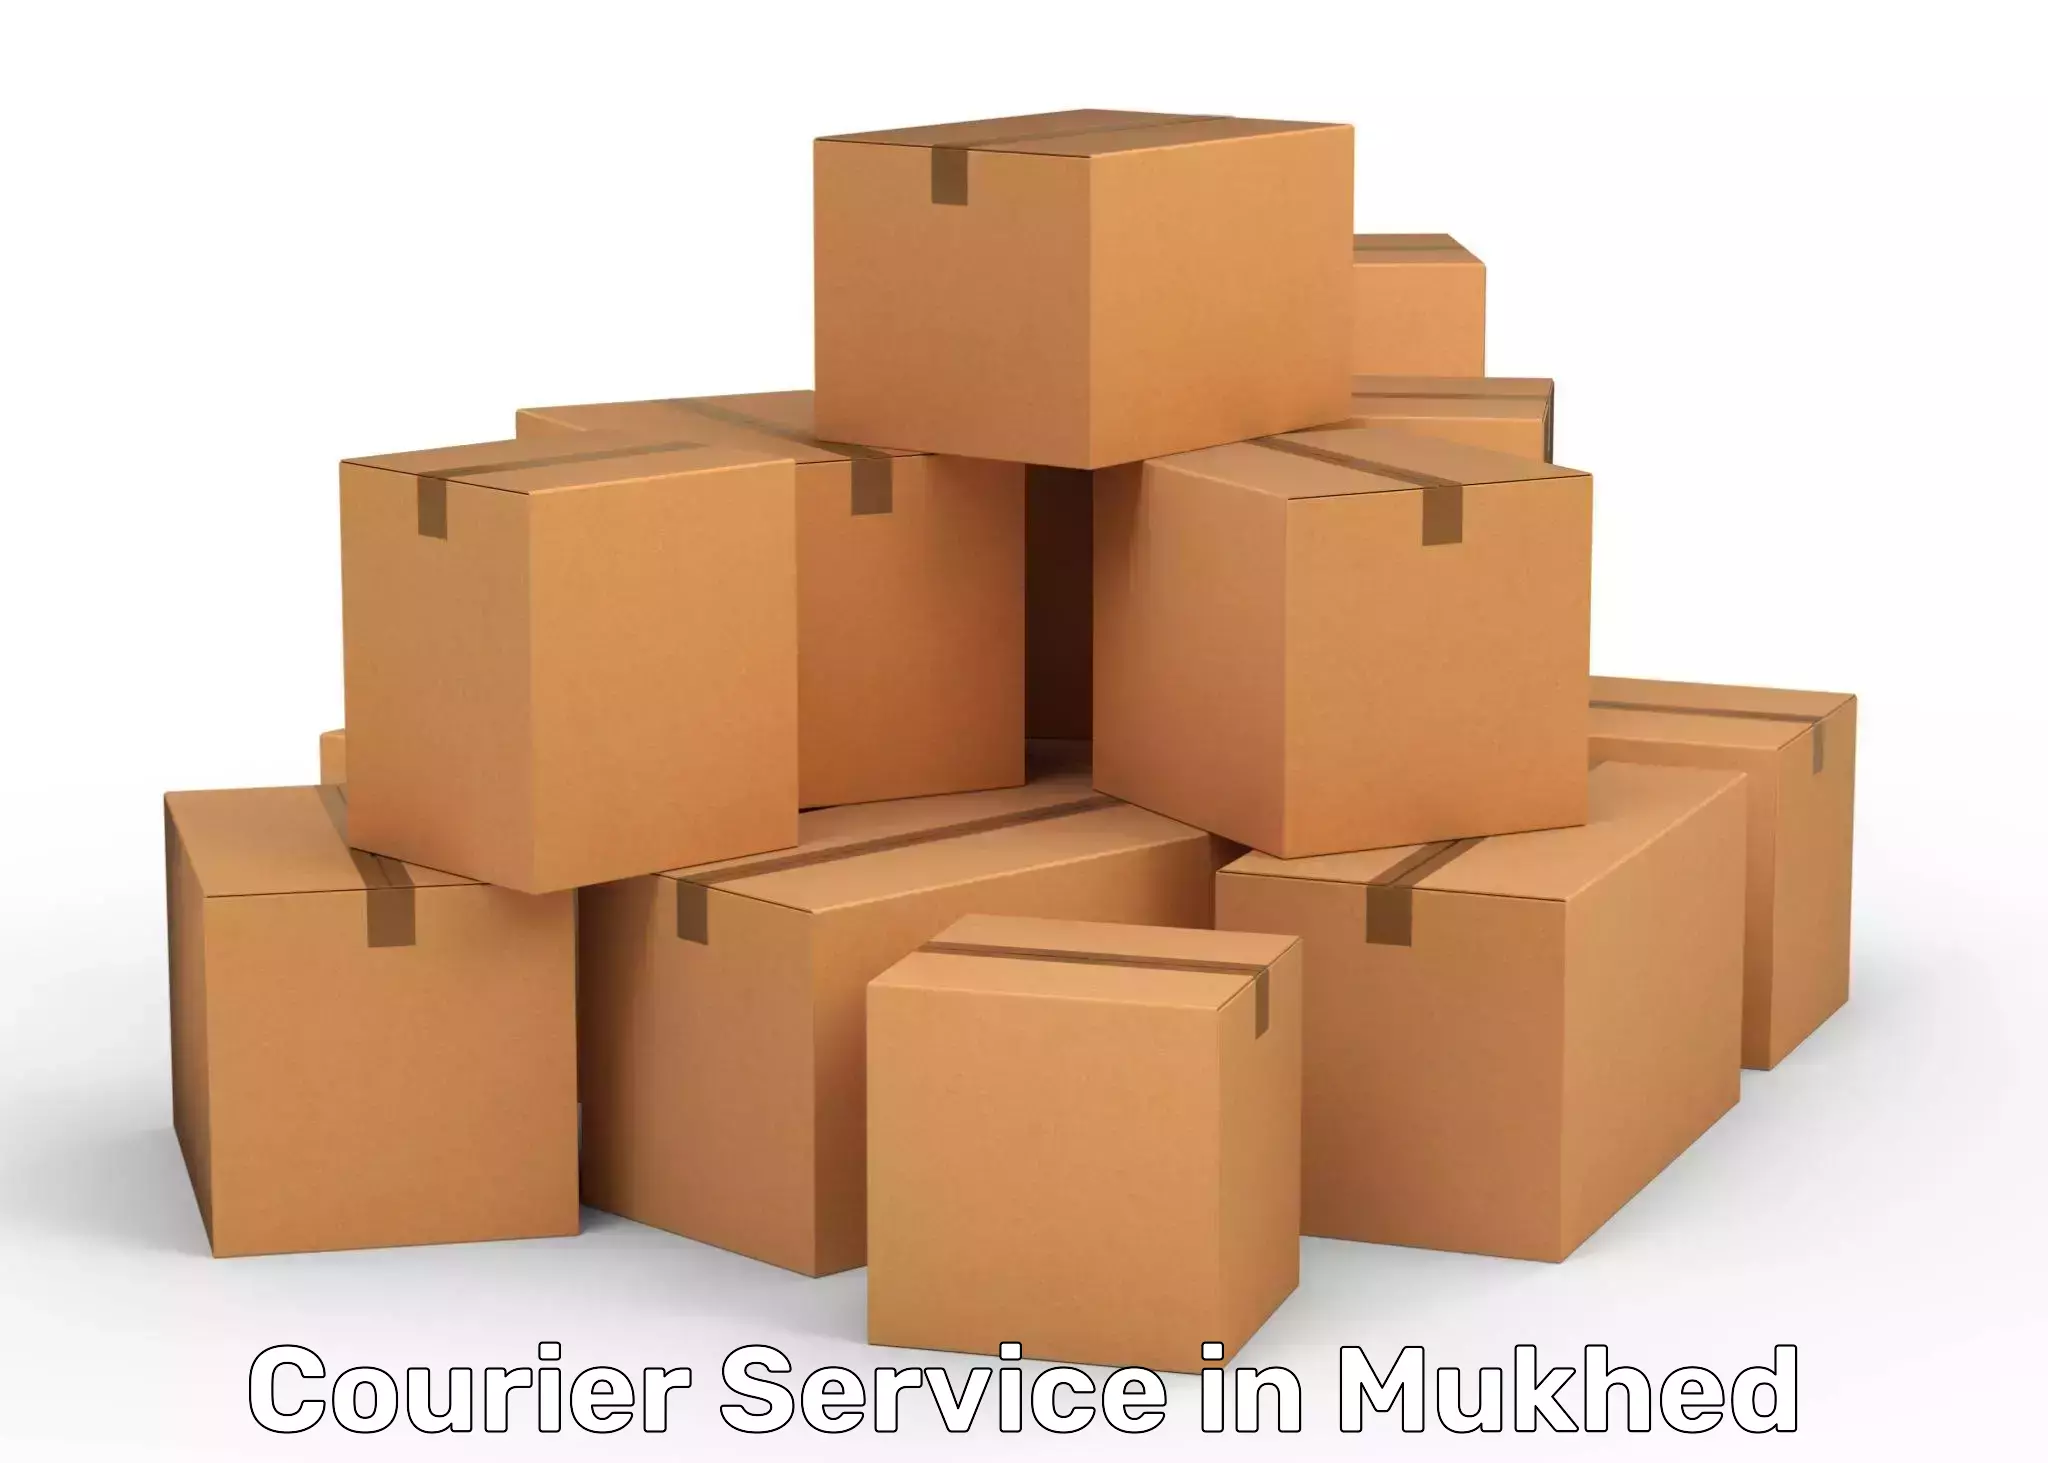 Efficient parcel tracking in Mukhed